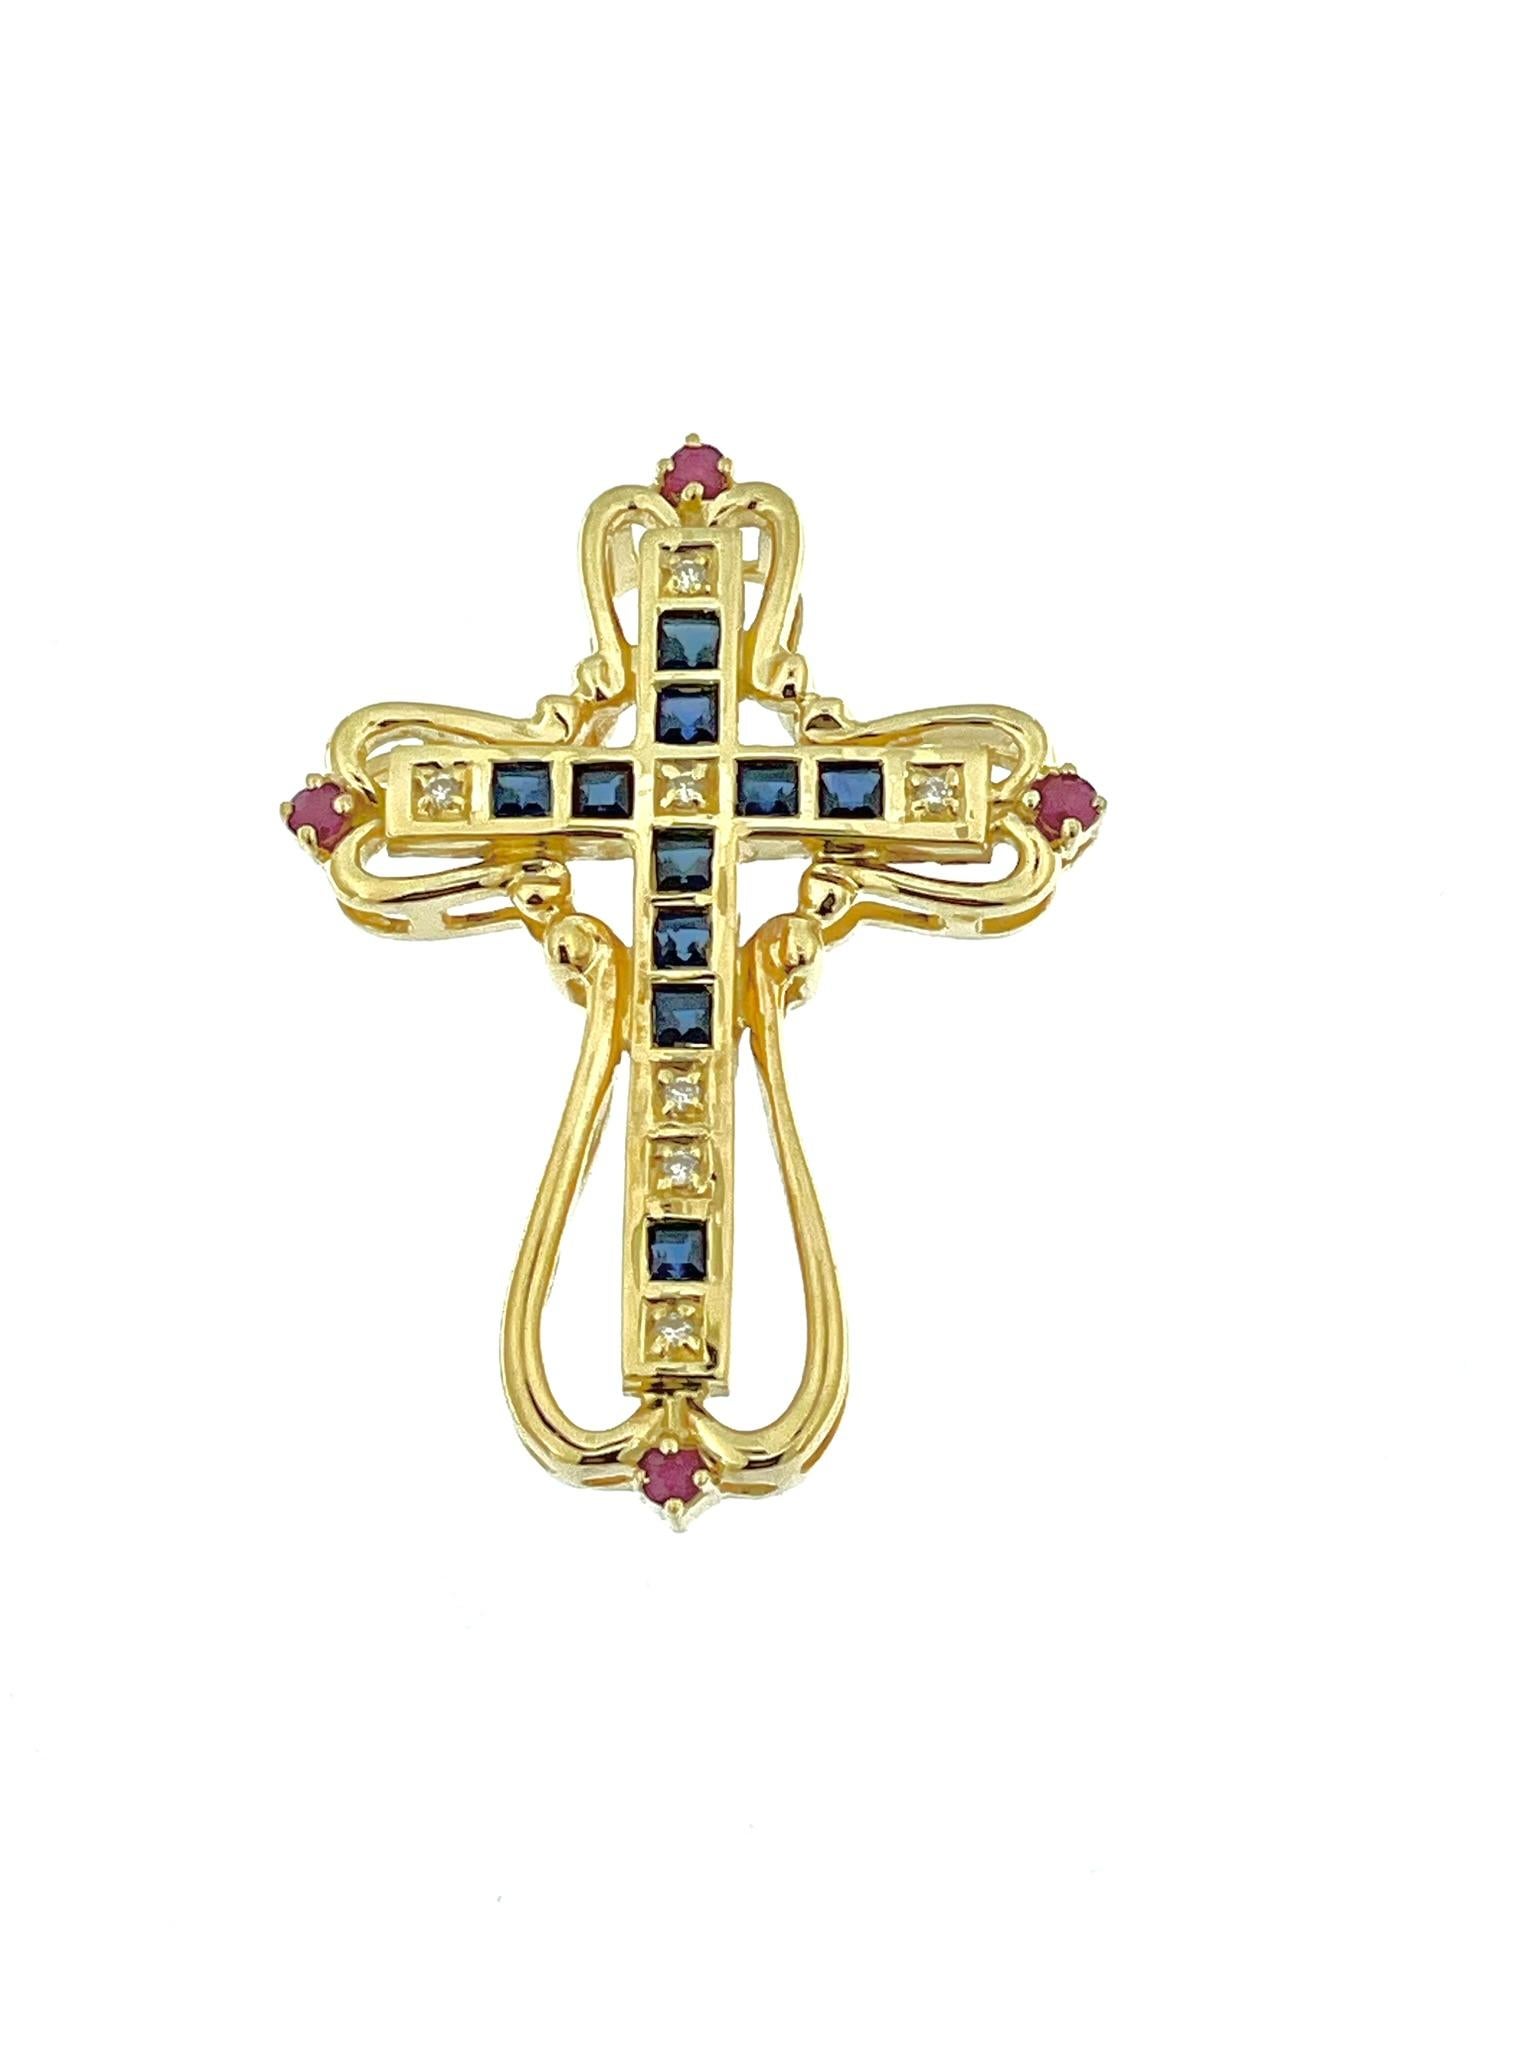 The Italian Yellow Gold Cross with Diamonds, Sapphires, and Rubies is a breathtaking piece of jewelry that exudes luxury and sophistication. Crafted from 18kt gold, this cross showcases the unparalleled artistry and attention to detail that Italian